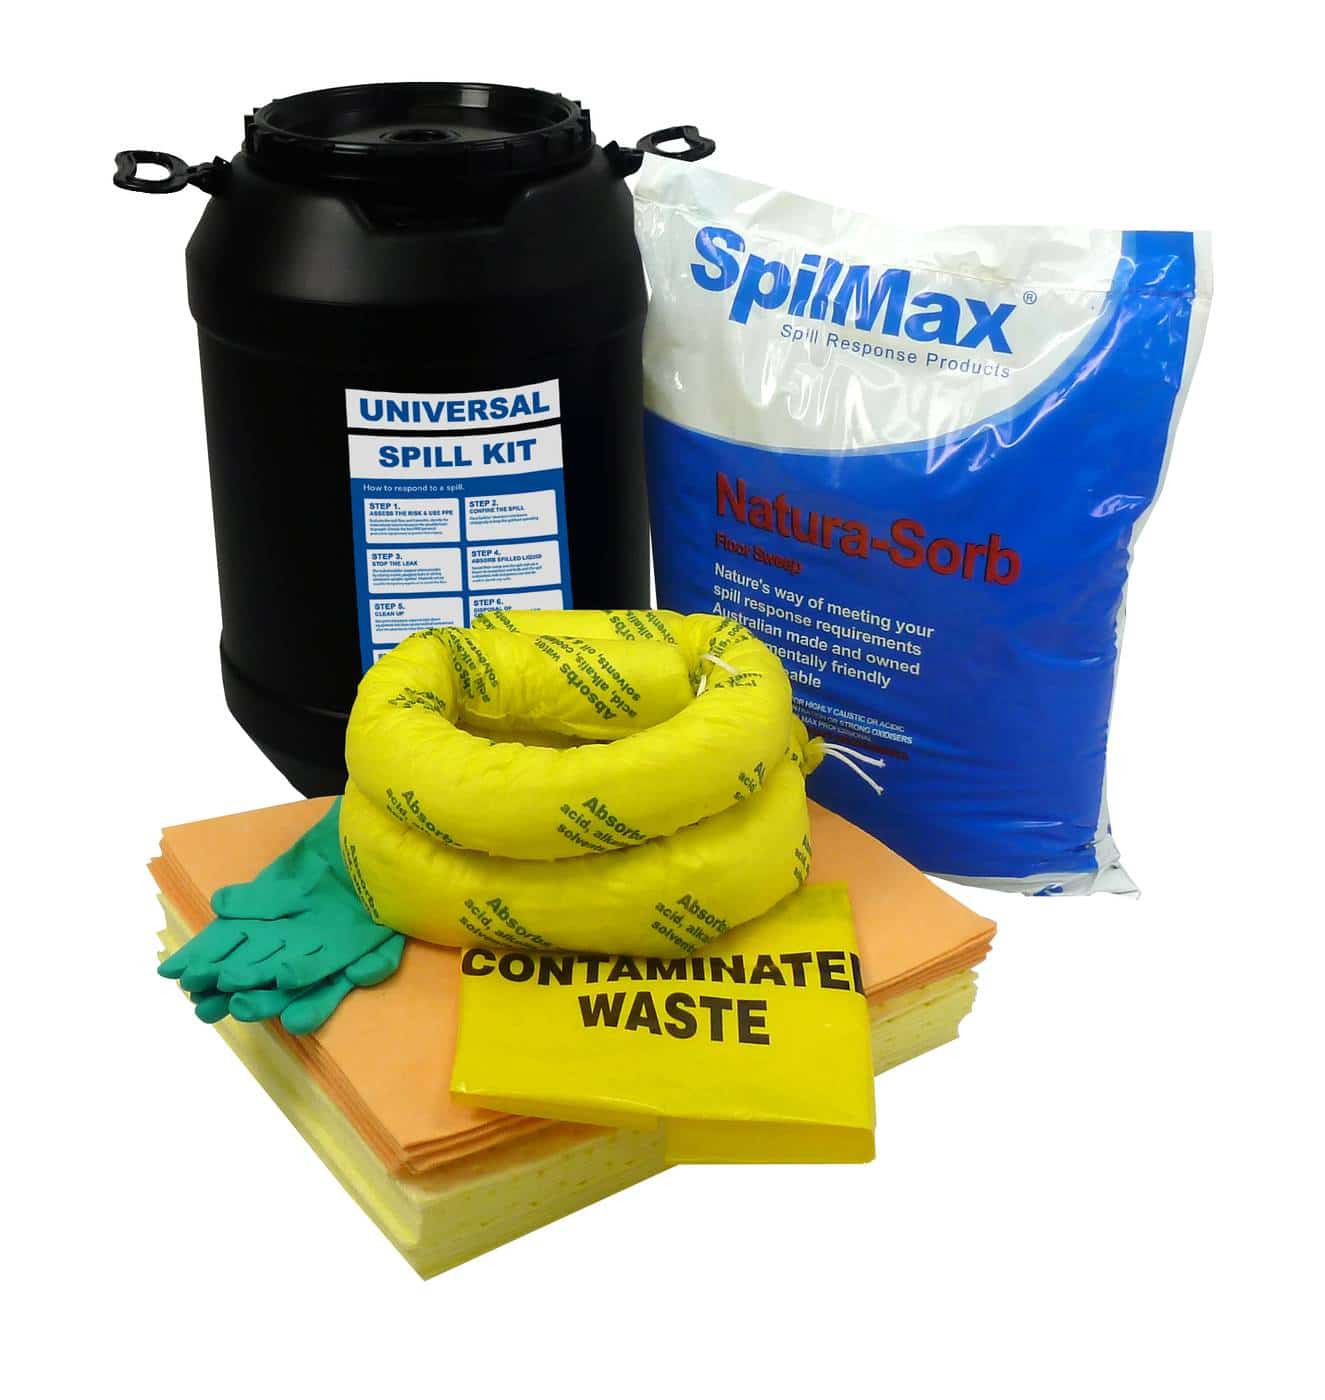 SpilMax 50L Universal Vehicle Spill Kit Drum with contents showing